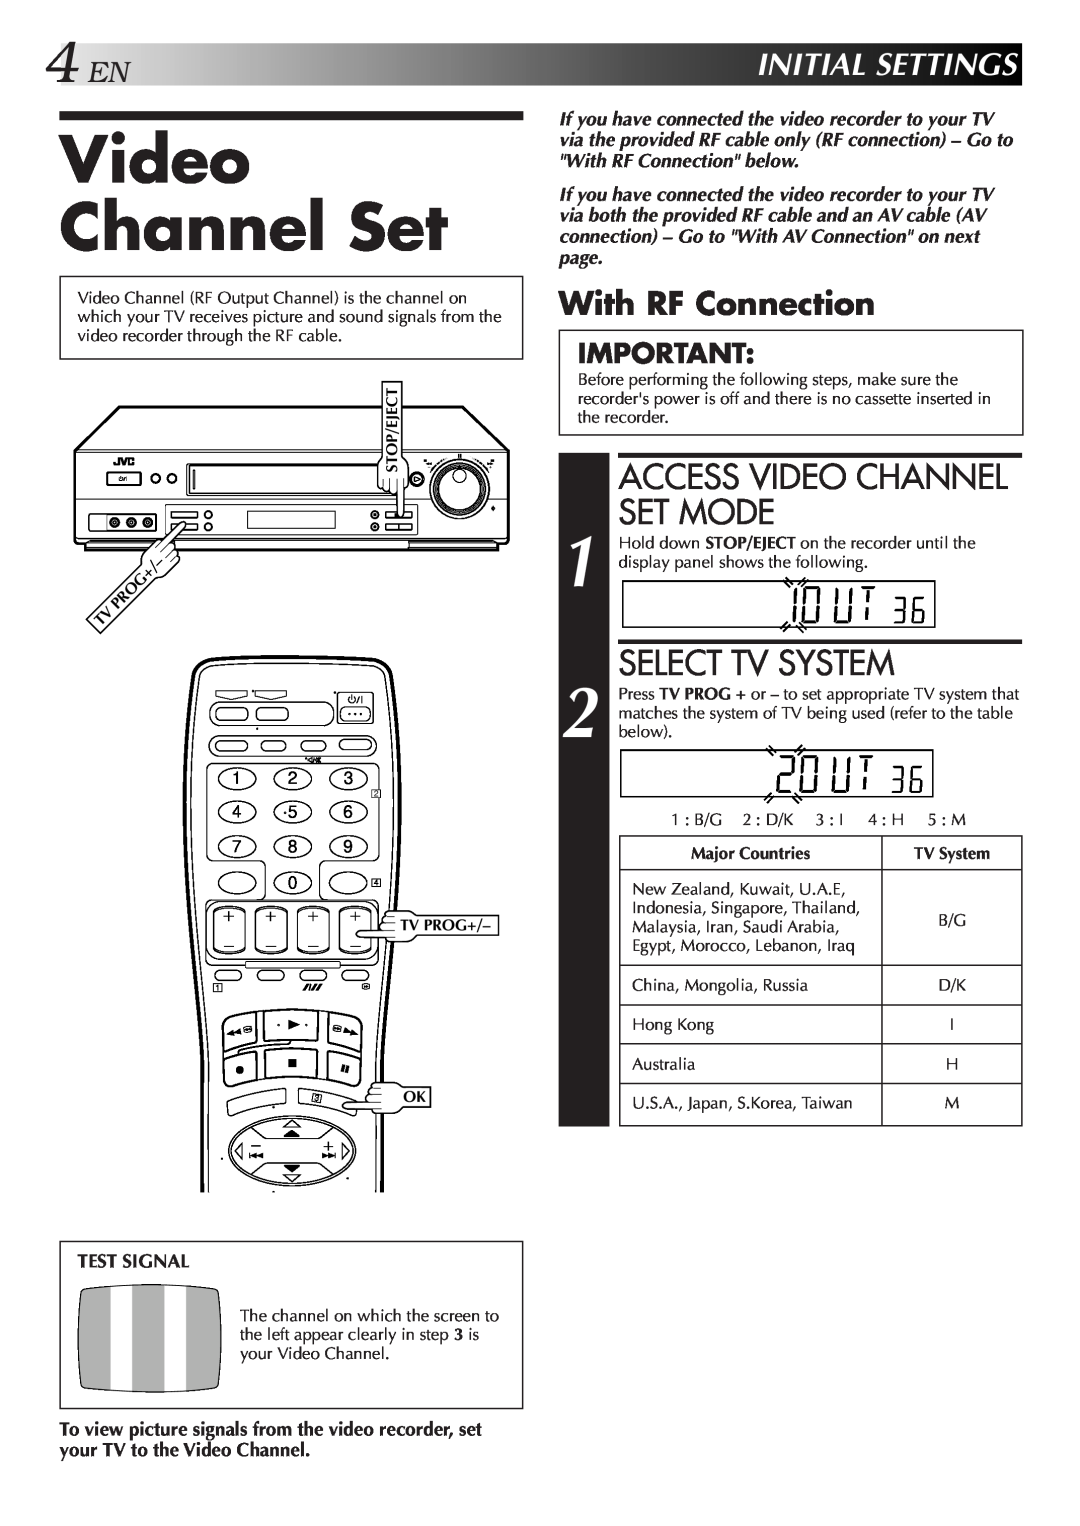 JVC HR-DD857MS specifications Access Video Channel Set Mode, Select Tv System, 4ENINITIALSETTINGS, With RF Connection 